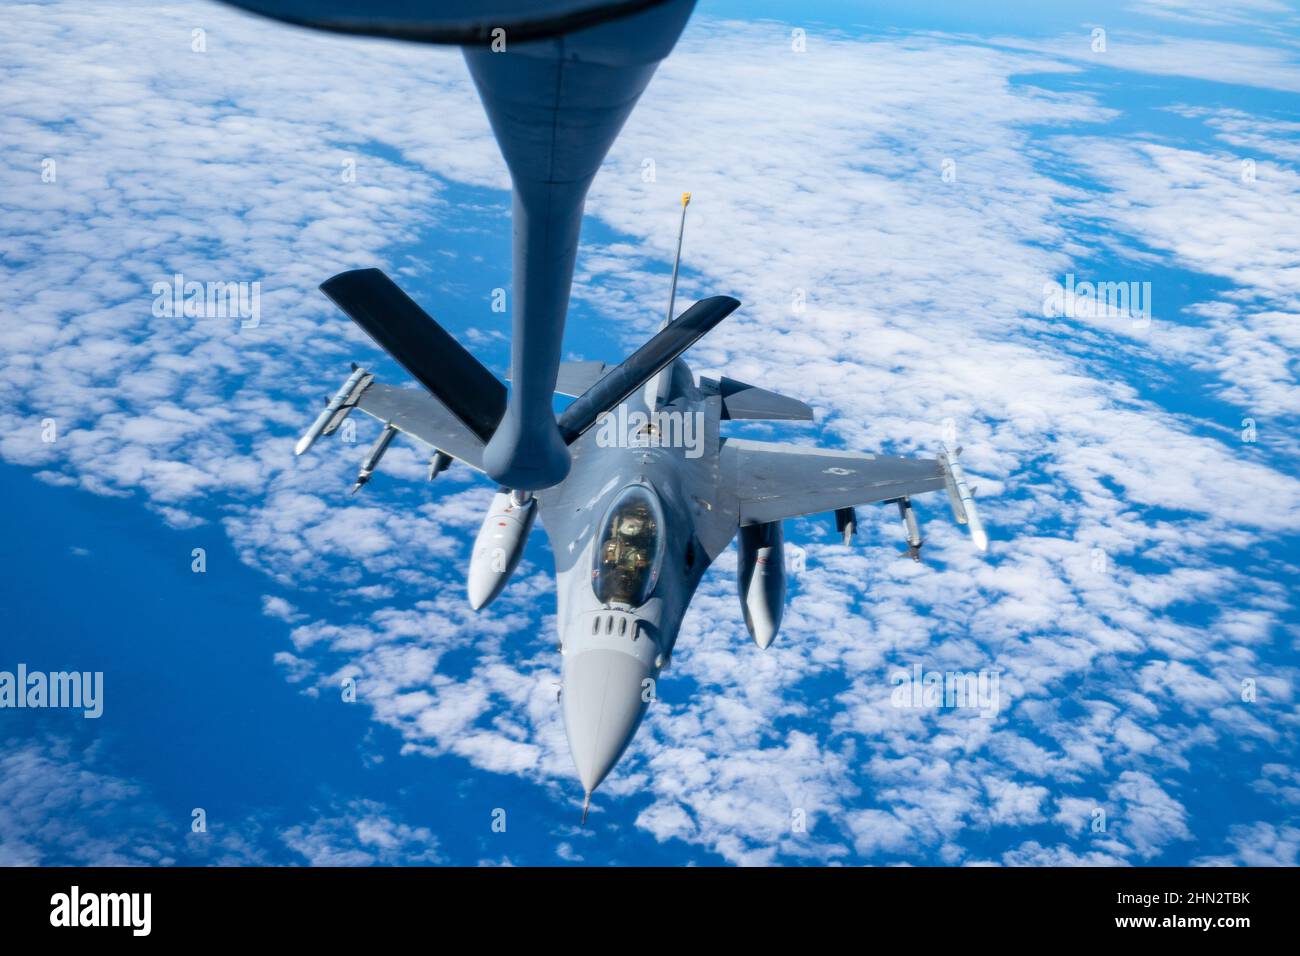 A U.S. Air Force  F-16 Fighting Falcon pilot assigned to the 14th Fighter Squadron conducts aerial refueling with a KC-135 Stratotanker aircraft assigned to the 909th Air Refueling Squadron during exercise Cope North 22 over the Pacific Ocean, Feb. 8, 2022. CN 22 allows each nation to hone vital readiness skills and enhance interoperability among multiple mission areas to include air superiority, interdiction, electronic warfare, tactical airlift, and aerial refueling capabilities. (U.S. Air Force photo by Master Sgt. Joey Swafford) Stock Photo